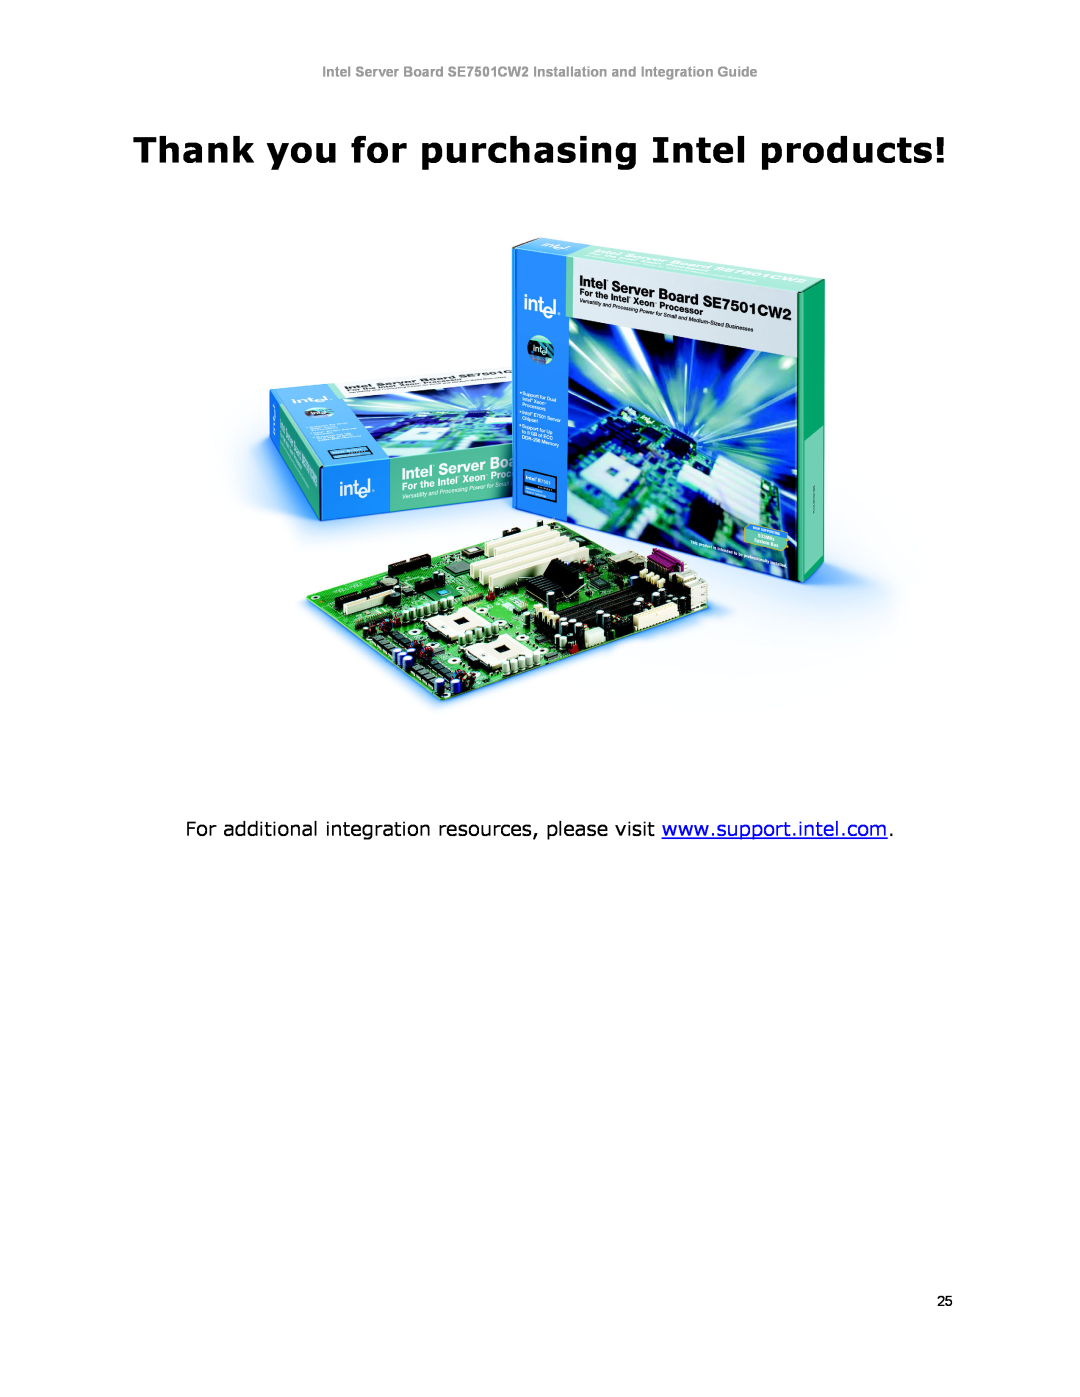 Intel SE7501CW2 manual Thank you for purchasing Intel products 